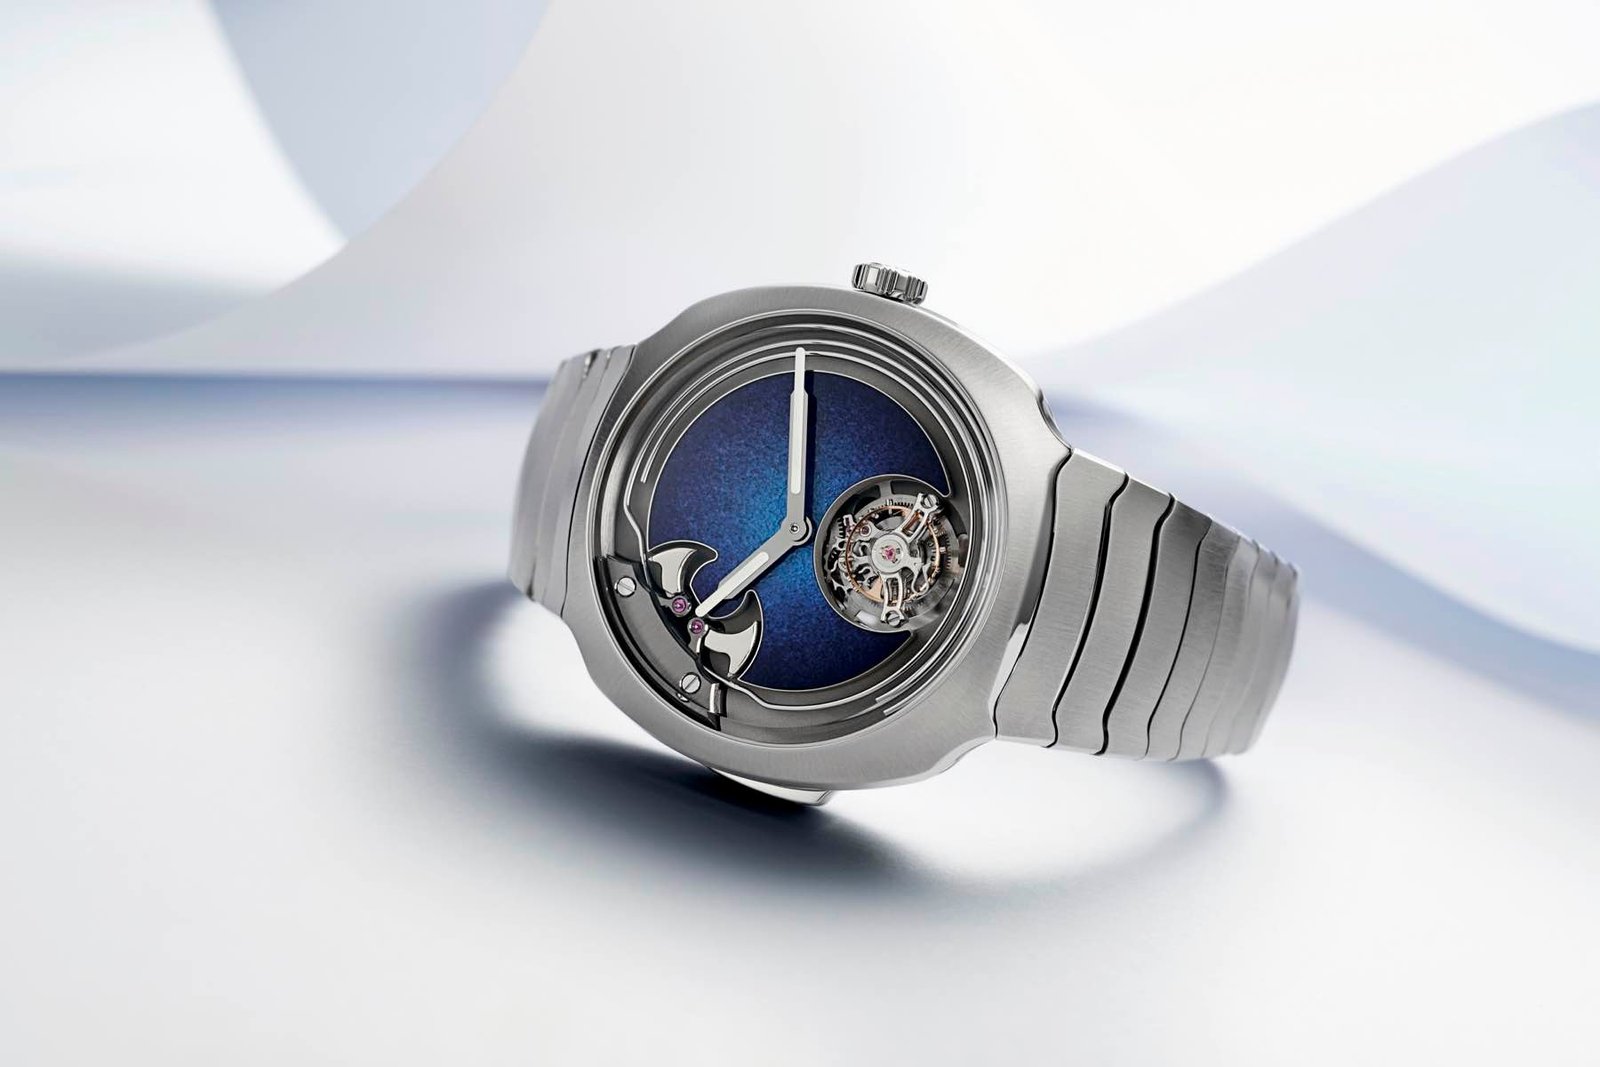 <div>Introducing: The H. Moser & Cie. Streamliner Concept Minute Repeater Tourbillon</div>